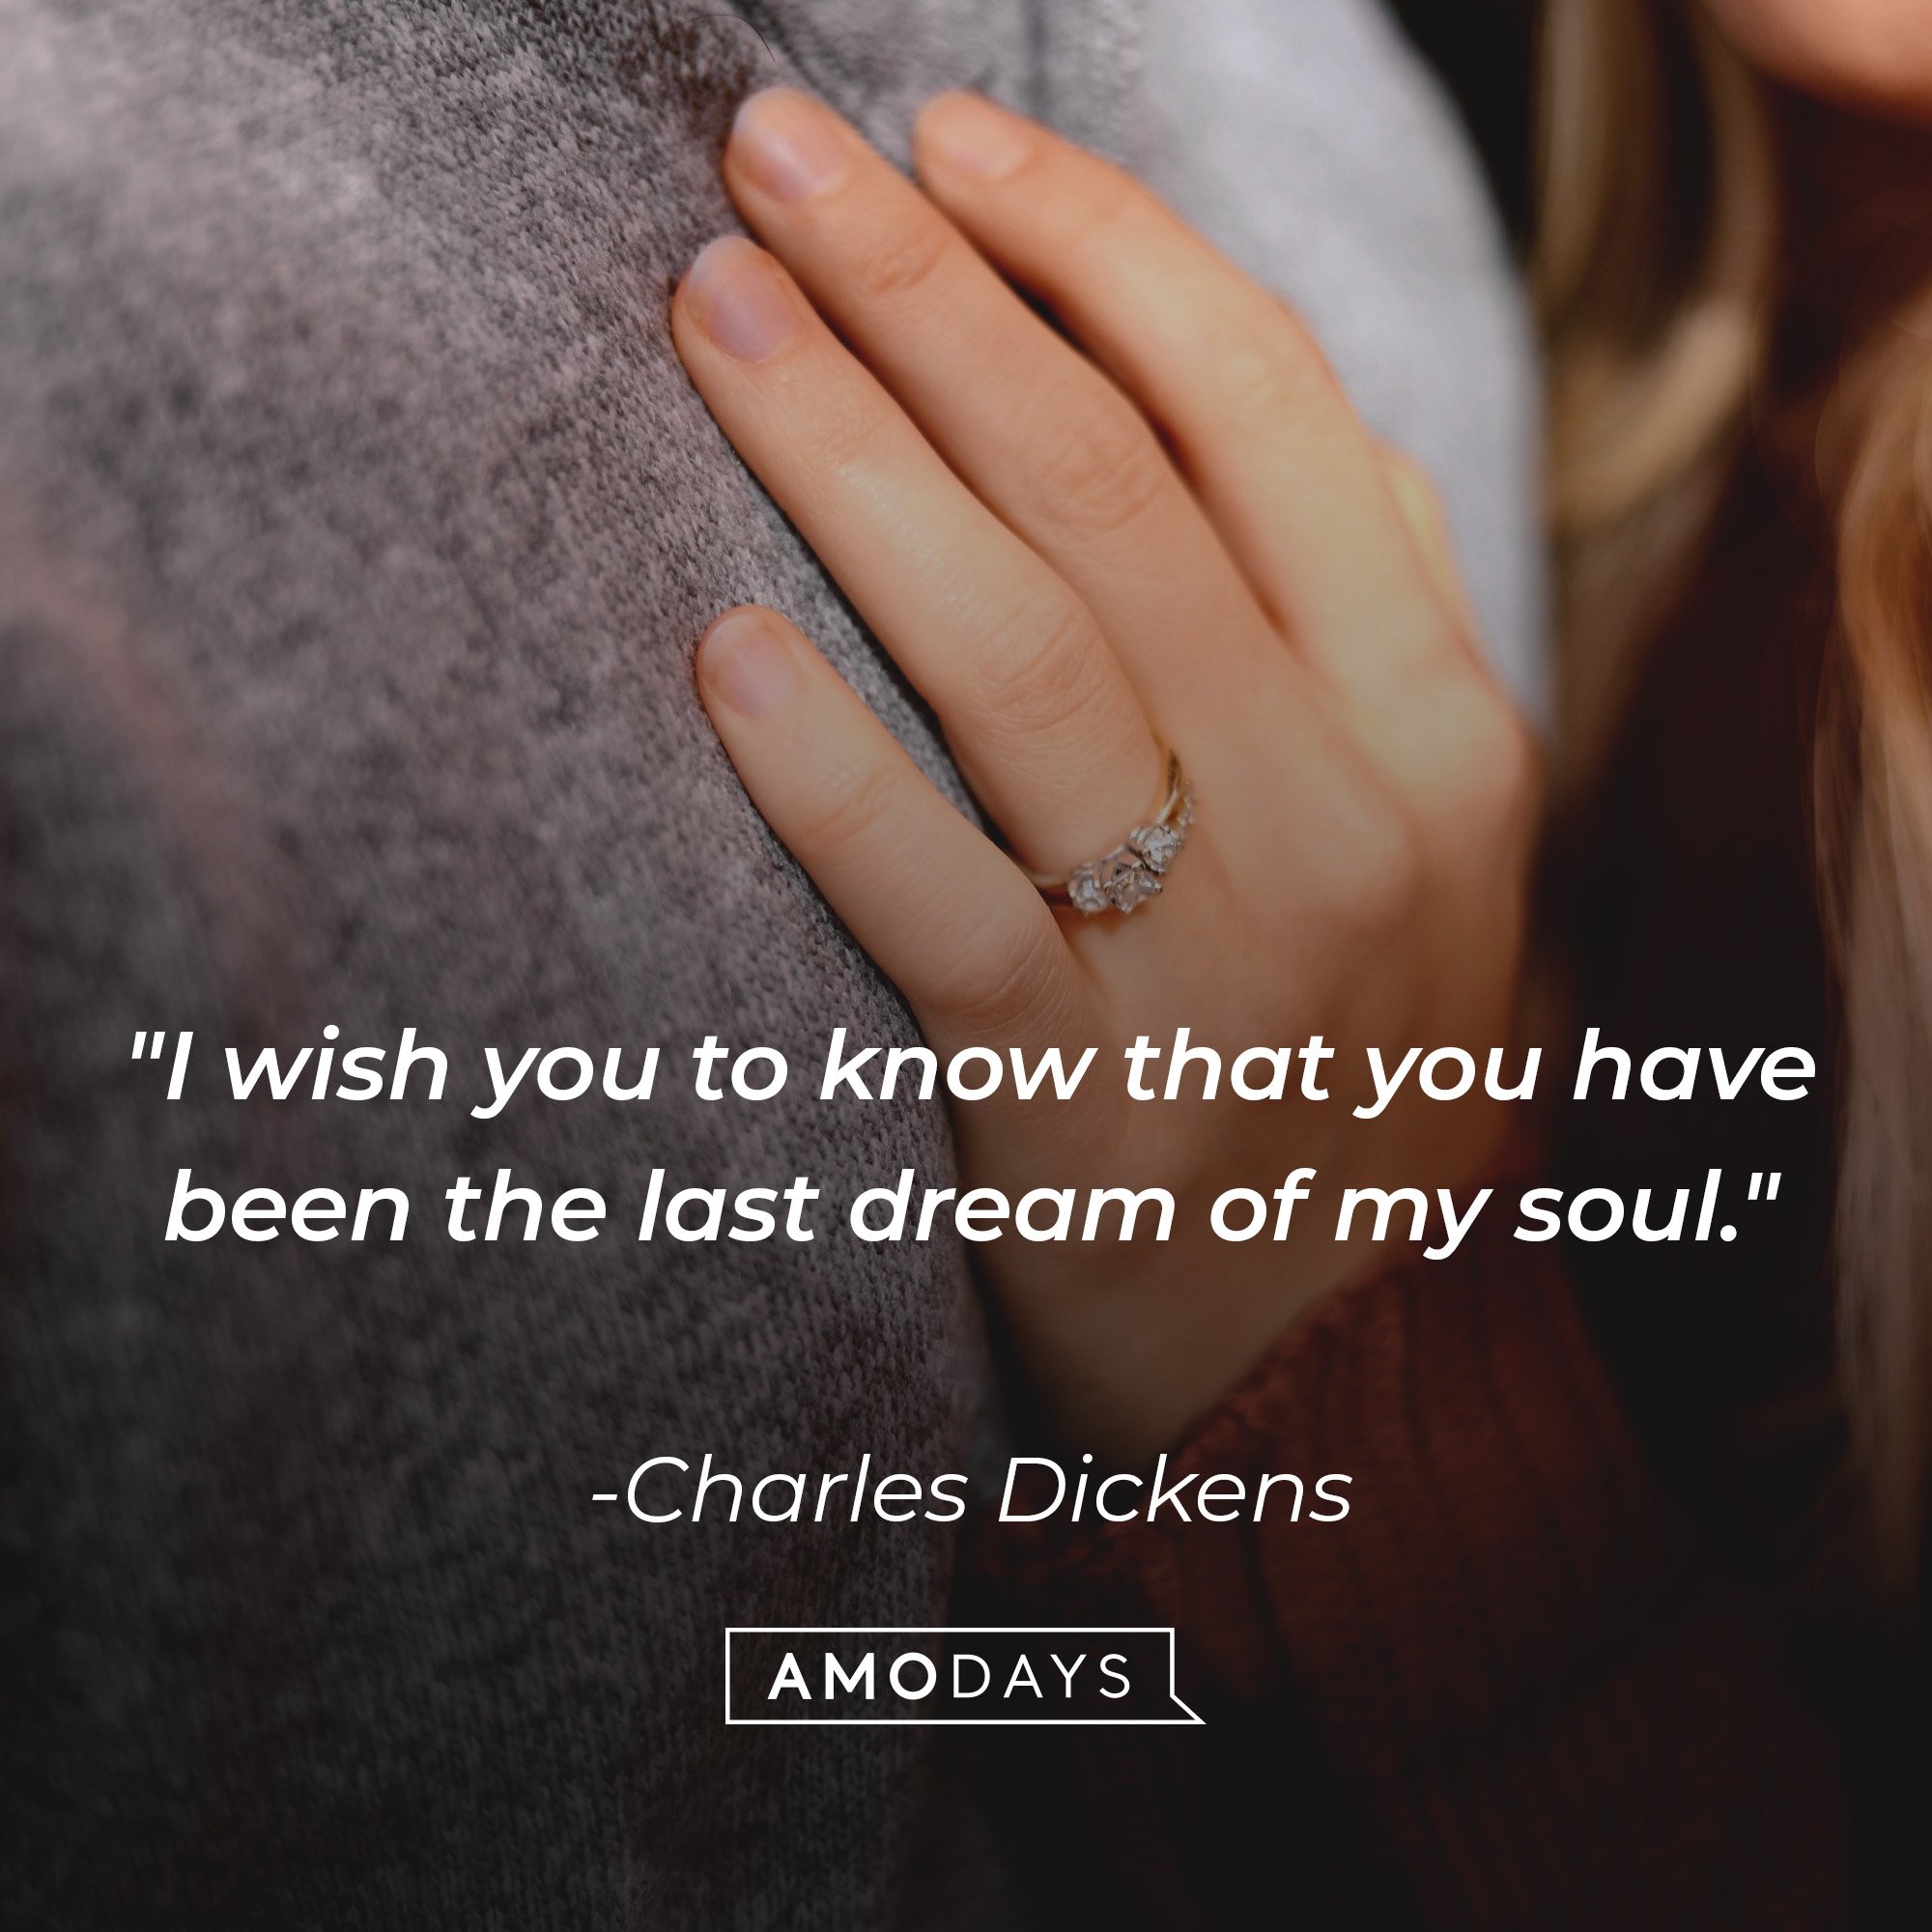 Charles Dickens' quote: "I wish you to know that you have been the last dream of my soul." | Image: AmoDays